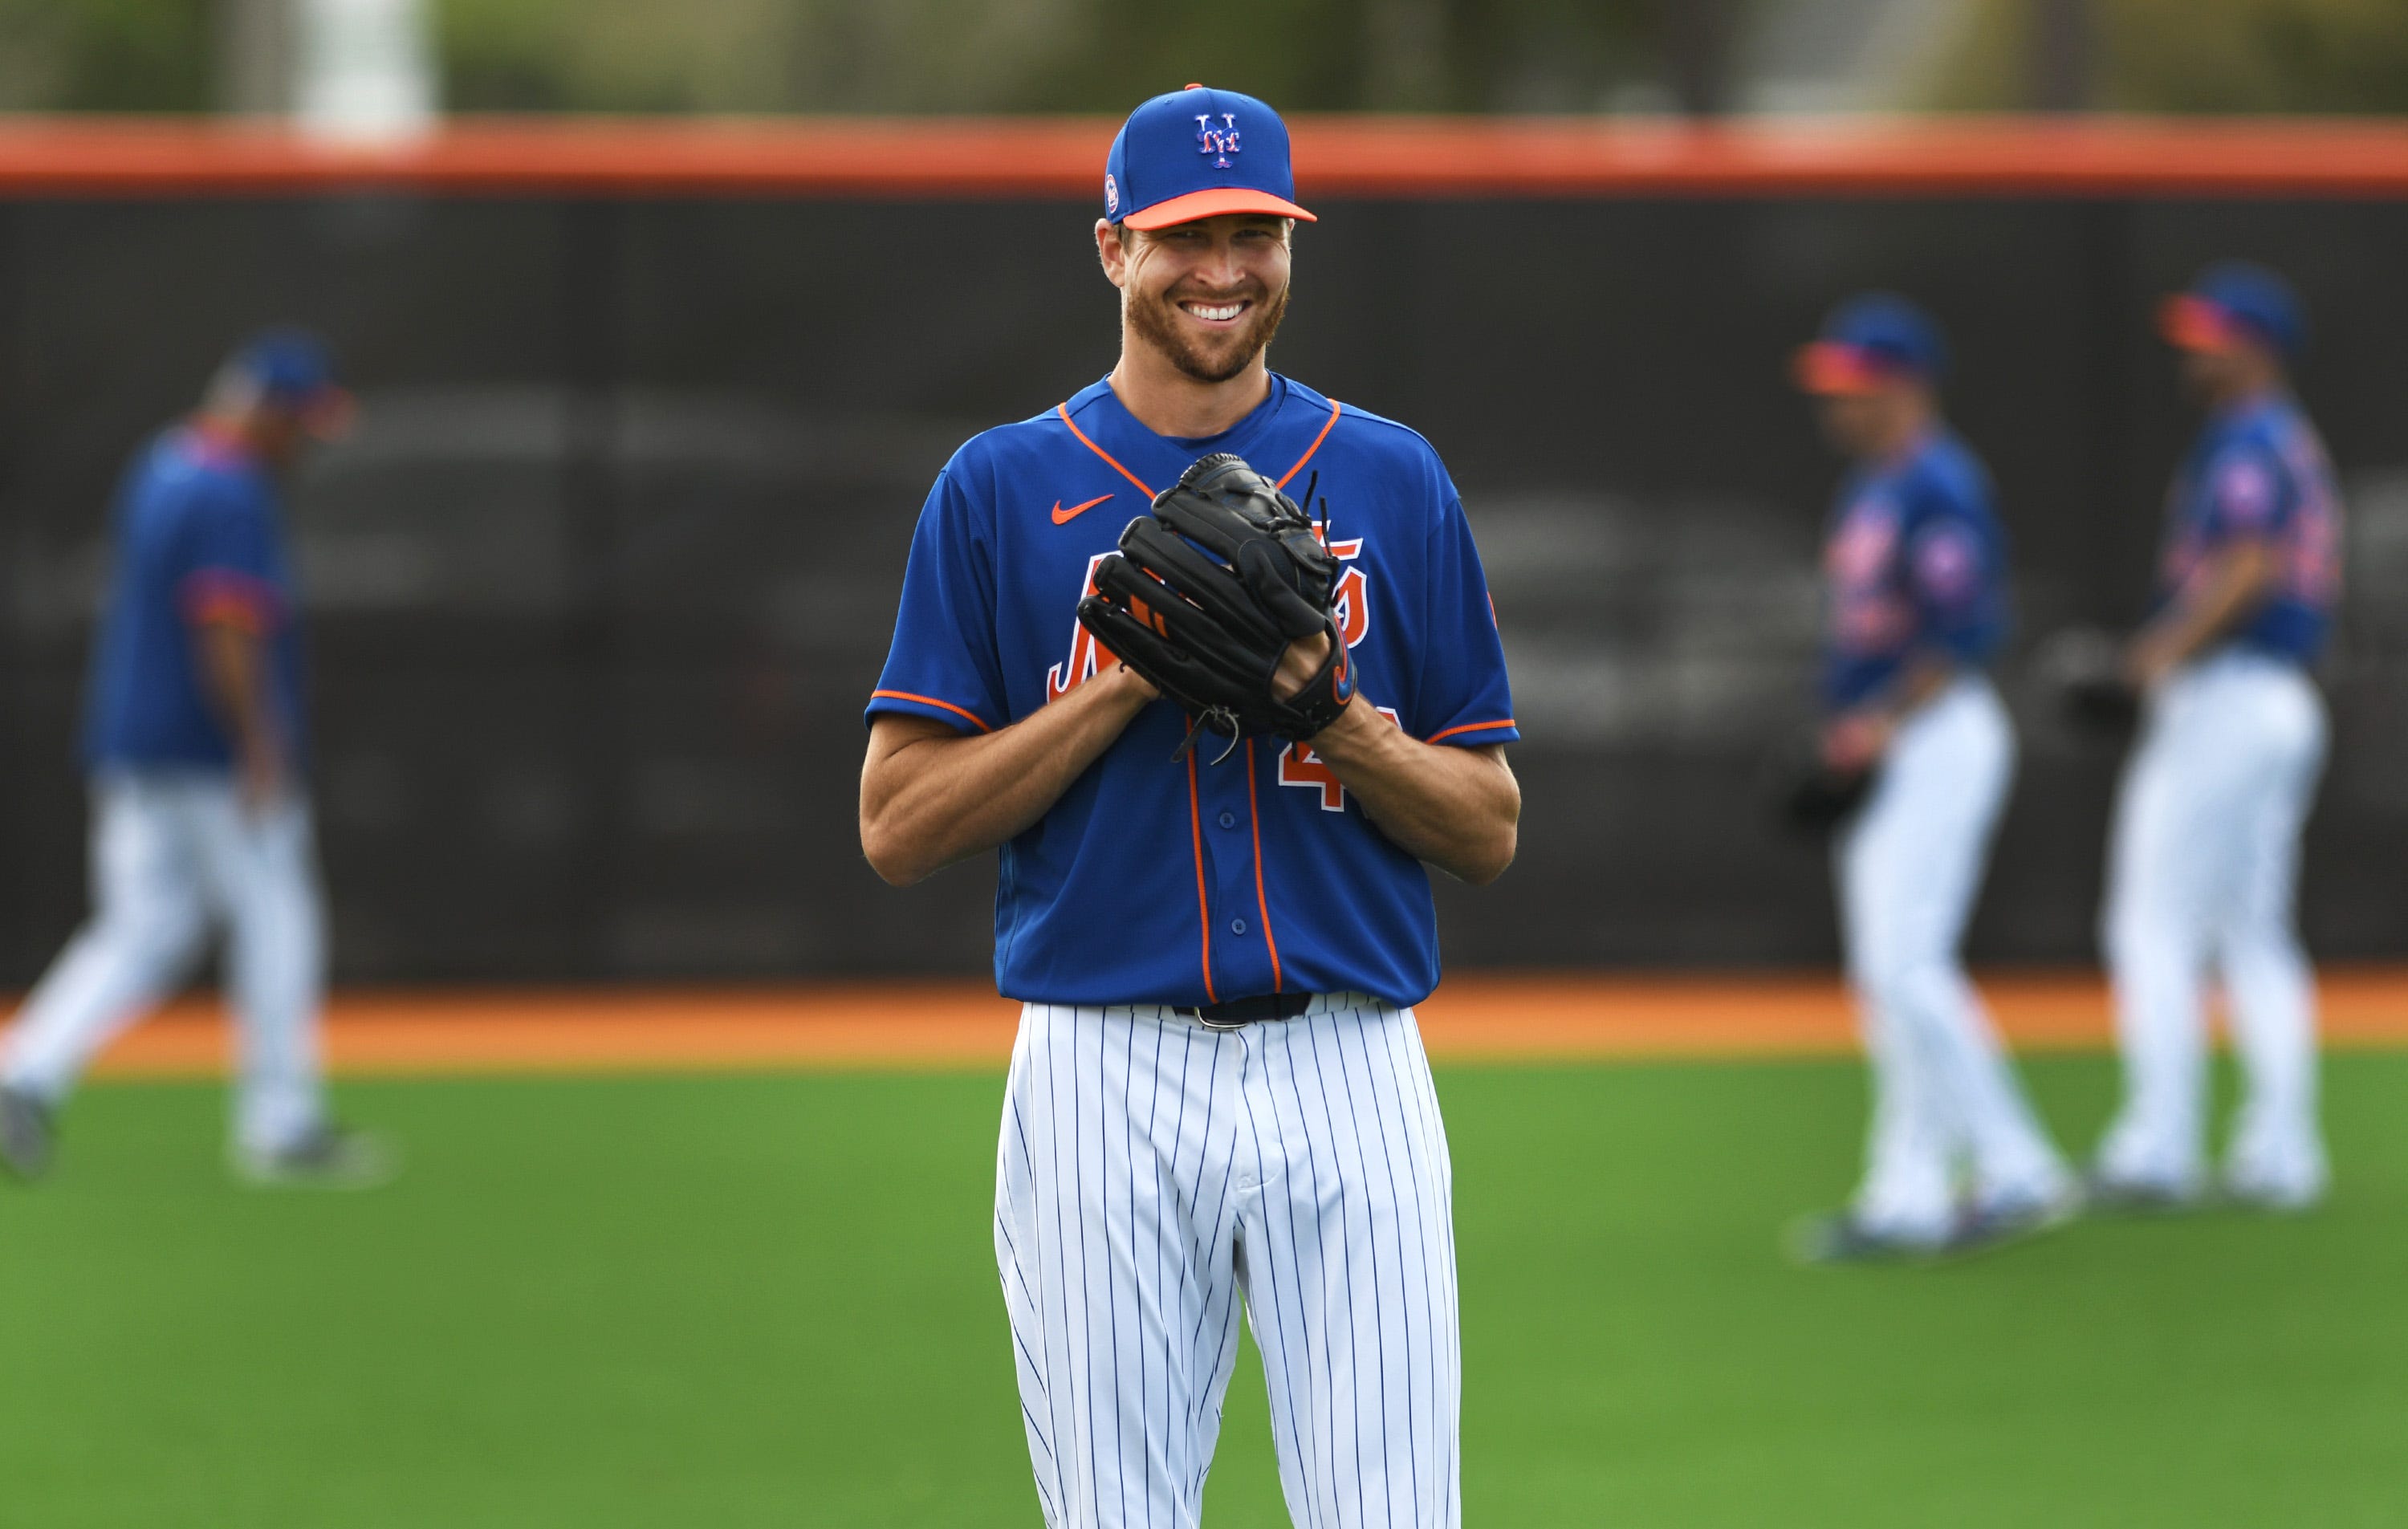 Jacob deGrom: NY Mets ace also starred 